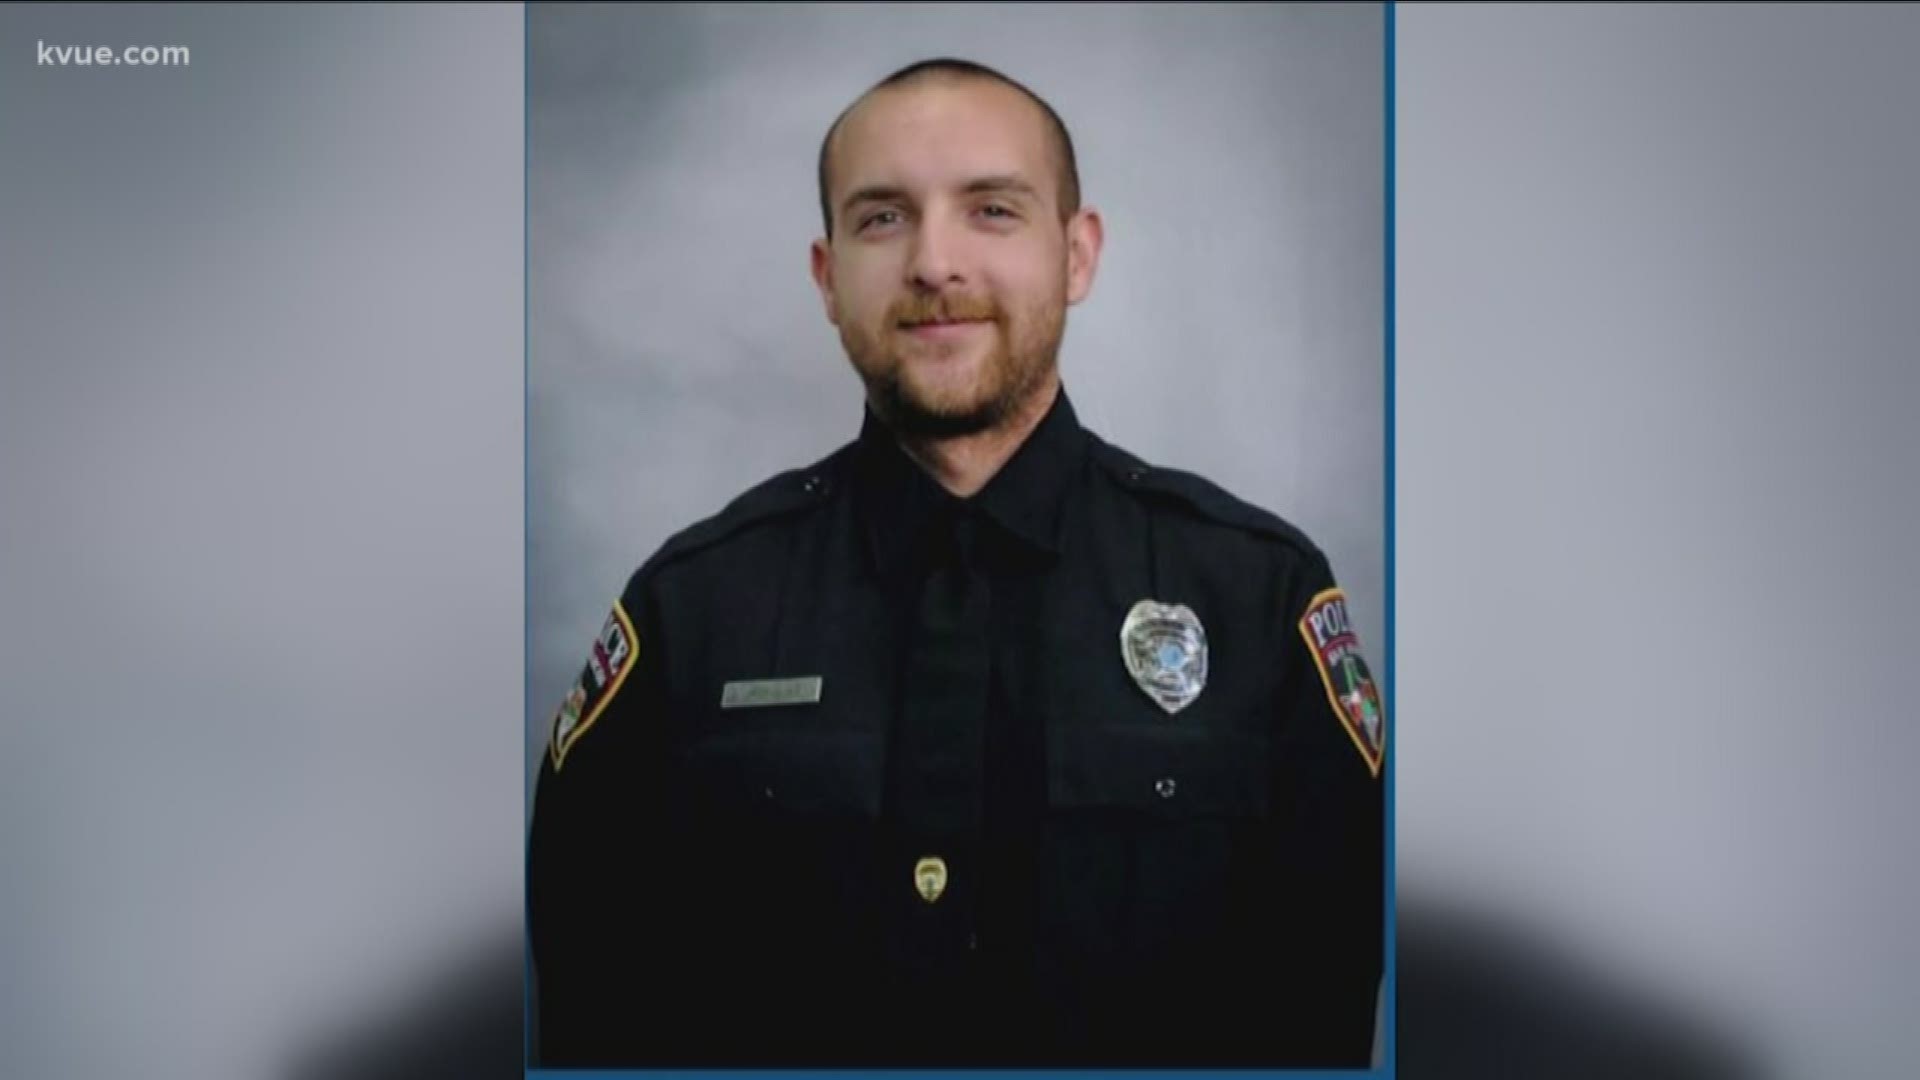 McAllen PD Officer Andrew Garza used to work with SMPD Officer Franco Stewart, who was critically injured responding to a call on April 18.